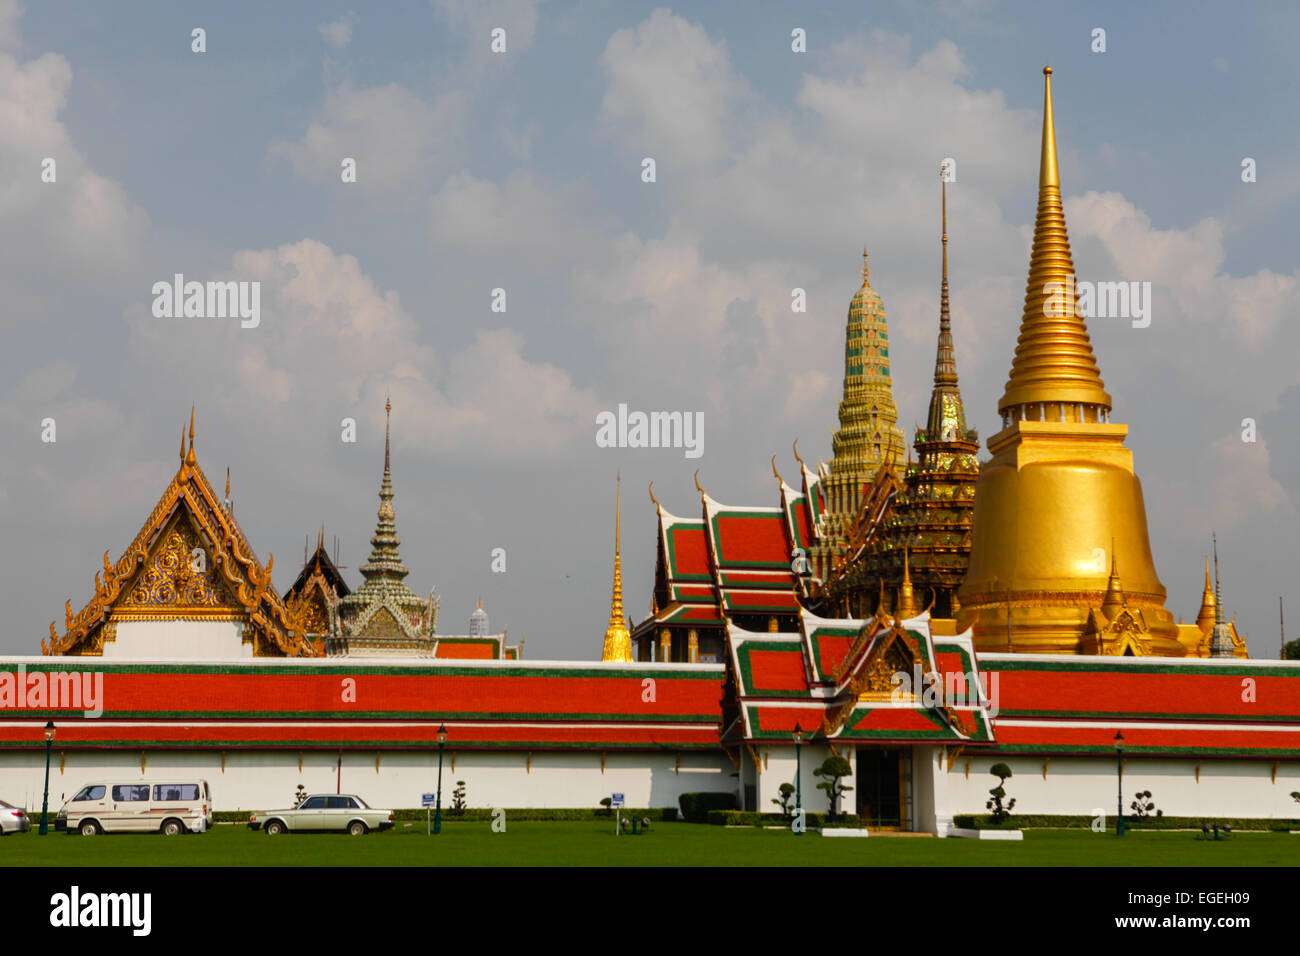 Wat Phra Kaew or Temple of the Emerald Buddha in royal grand palace and temple complex, seen from outer court. Bangkok. Stock Photo